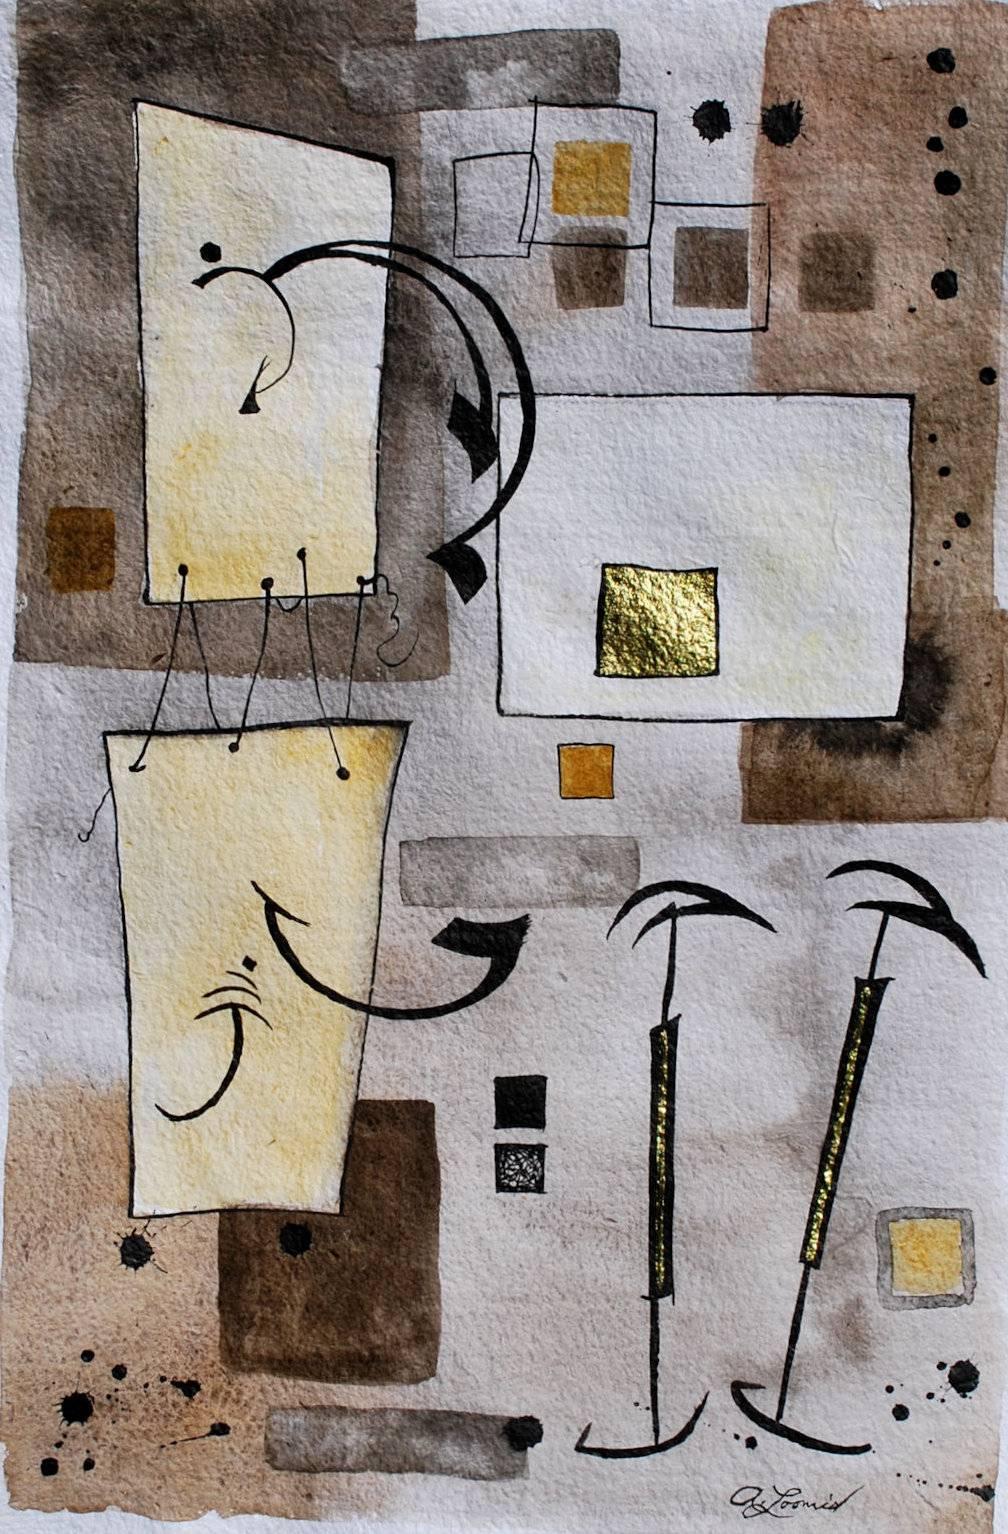 Abstract Drawing Anita Loomis - « The Couple », abstrait, minimaliste, feuille d'or, aquarelle